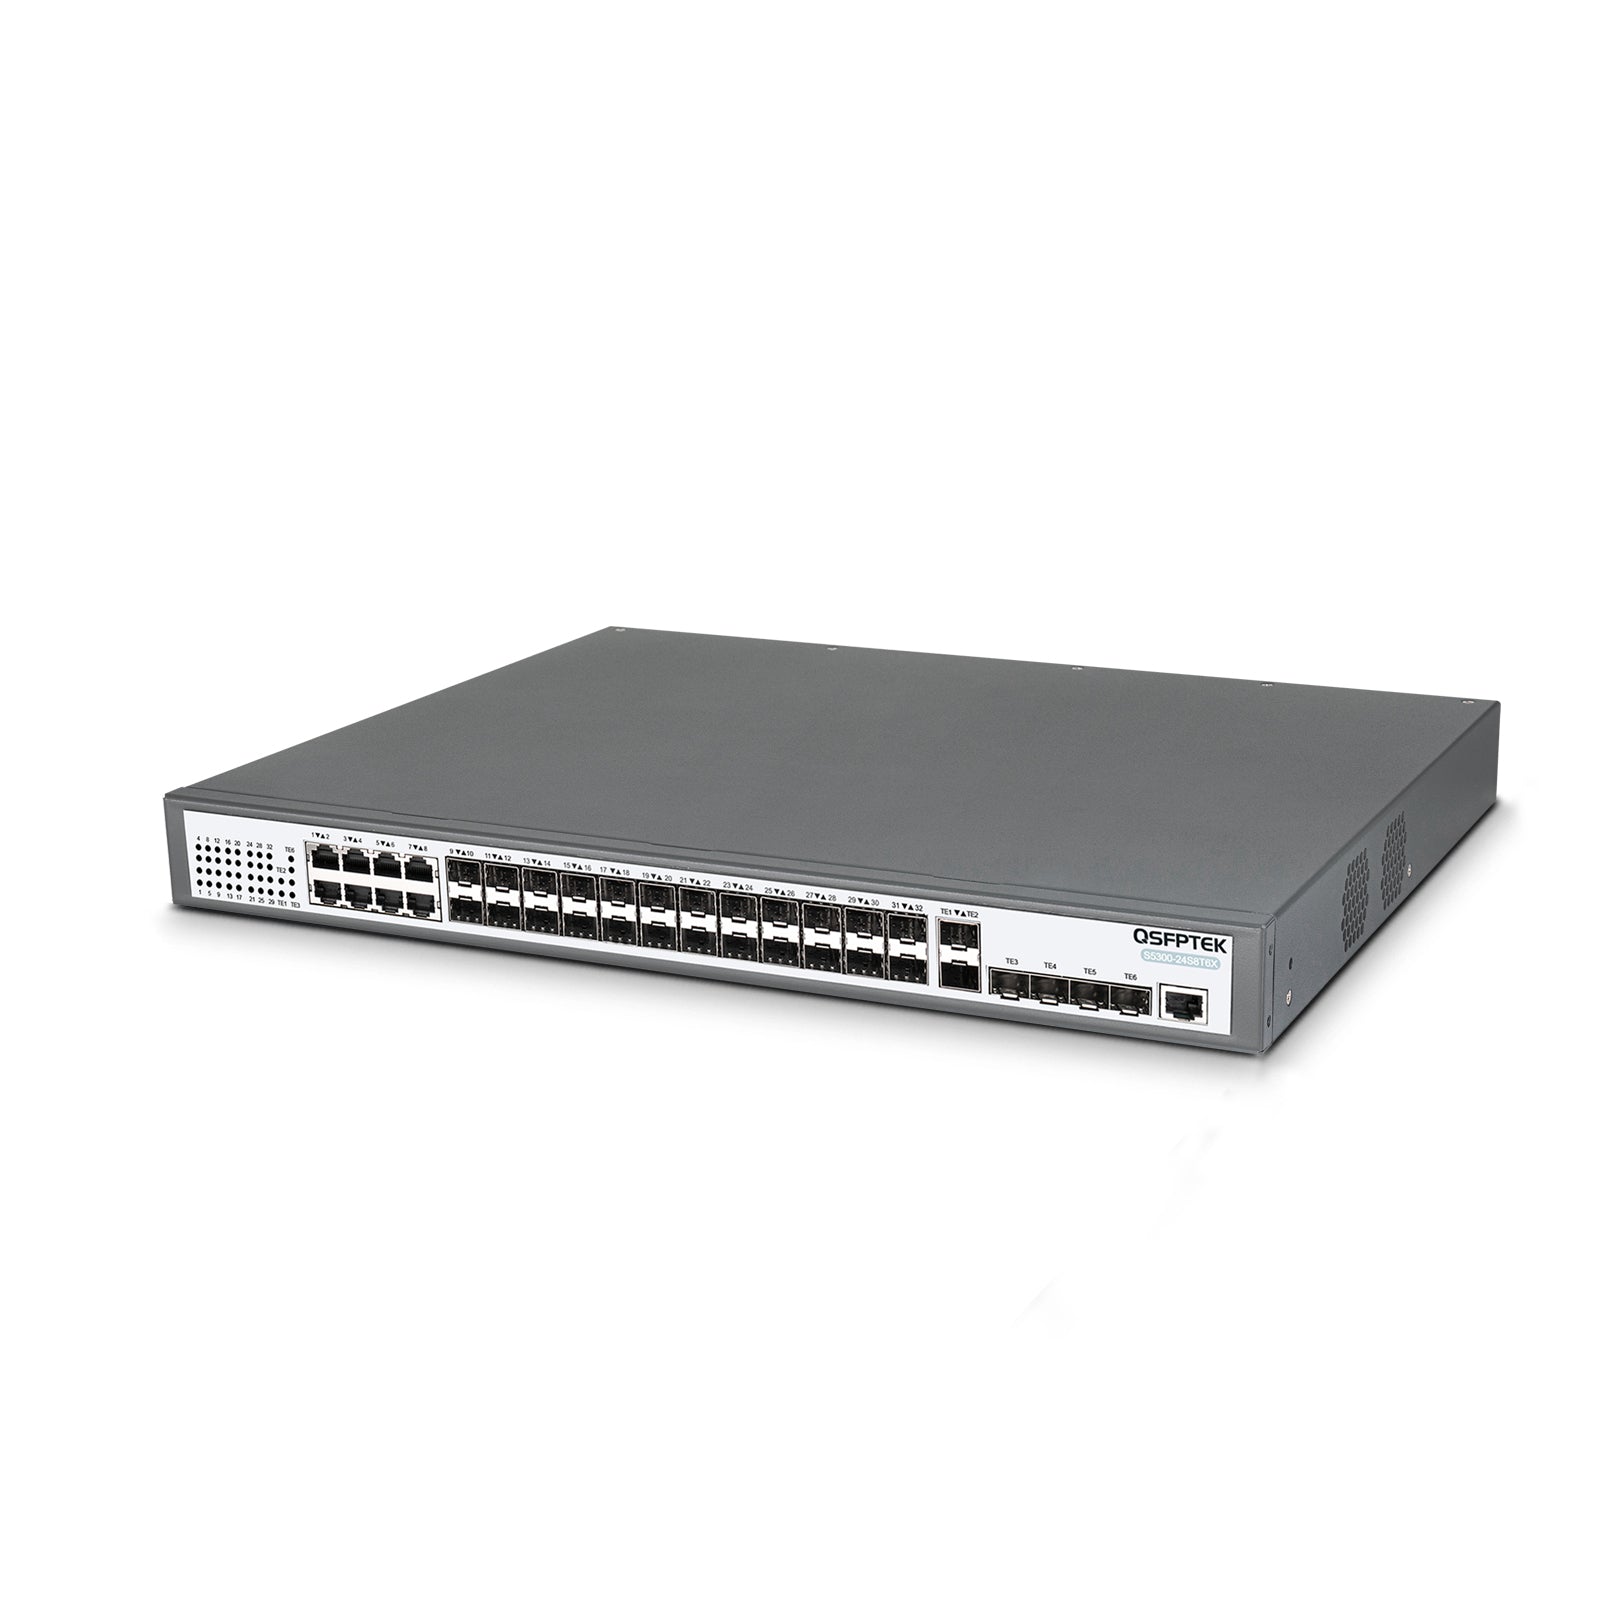 S5300-24S8T6X, 24-Port Ethernet L3 Switch, 24x GE SFP Ports, 8x GE RJ45 with 6x 10GE SFP+ Uplink, Stackable Switch